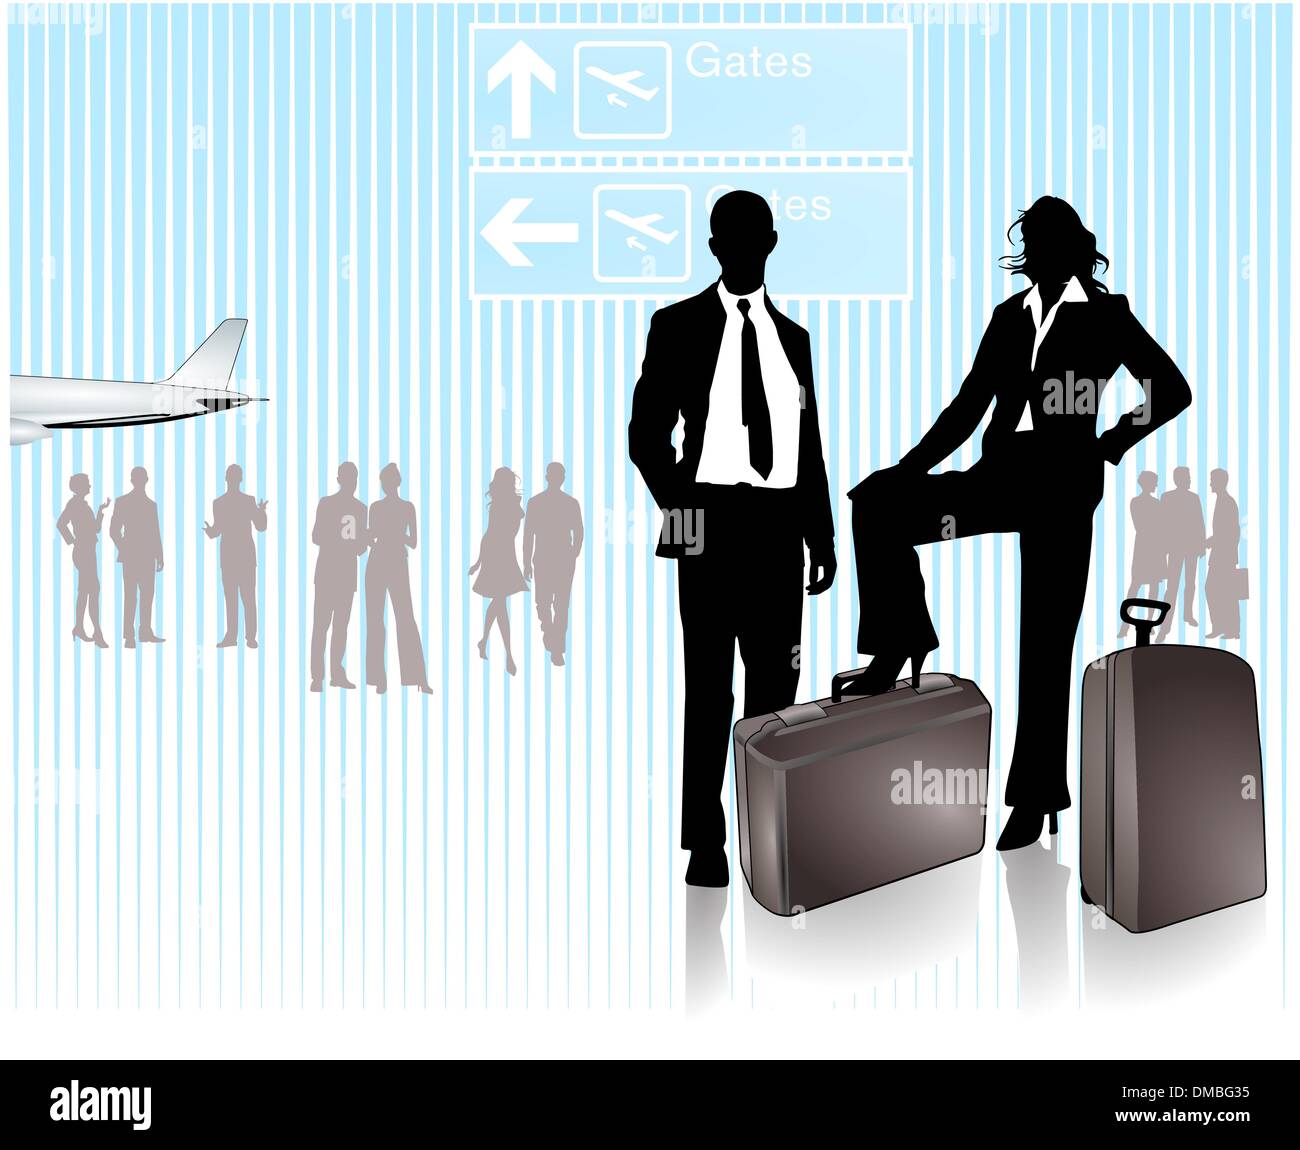 on the Airport Stock Vector